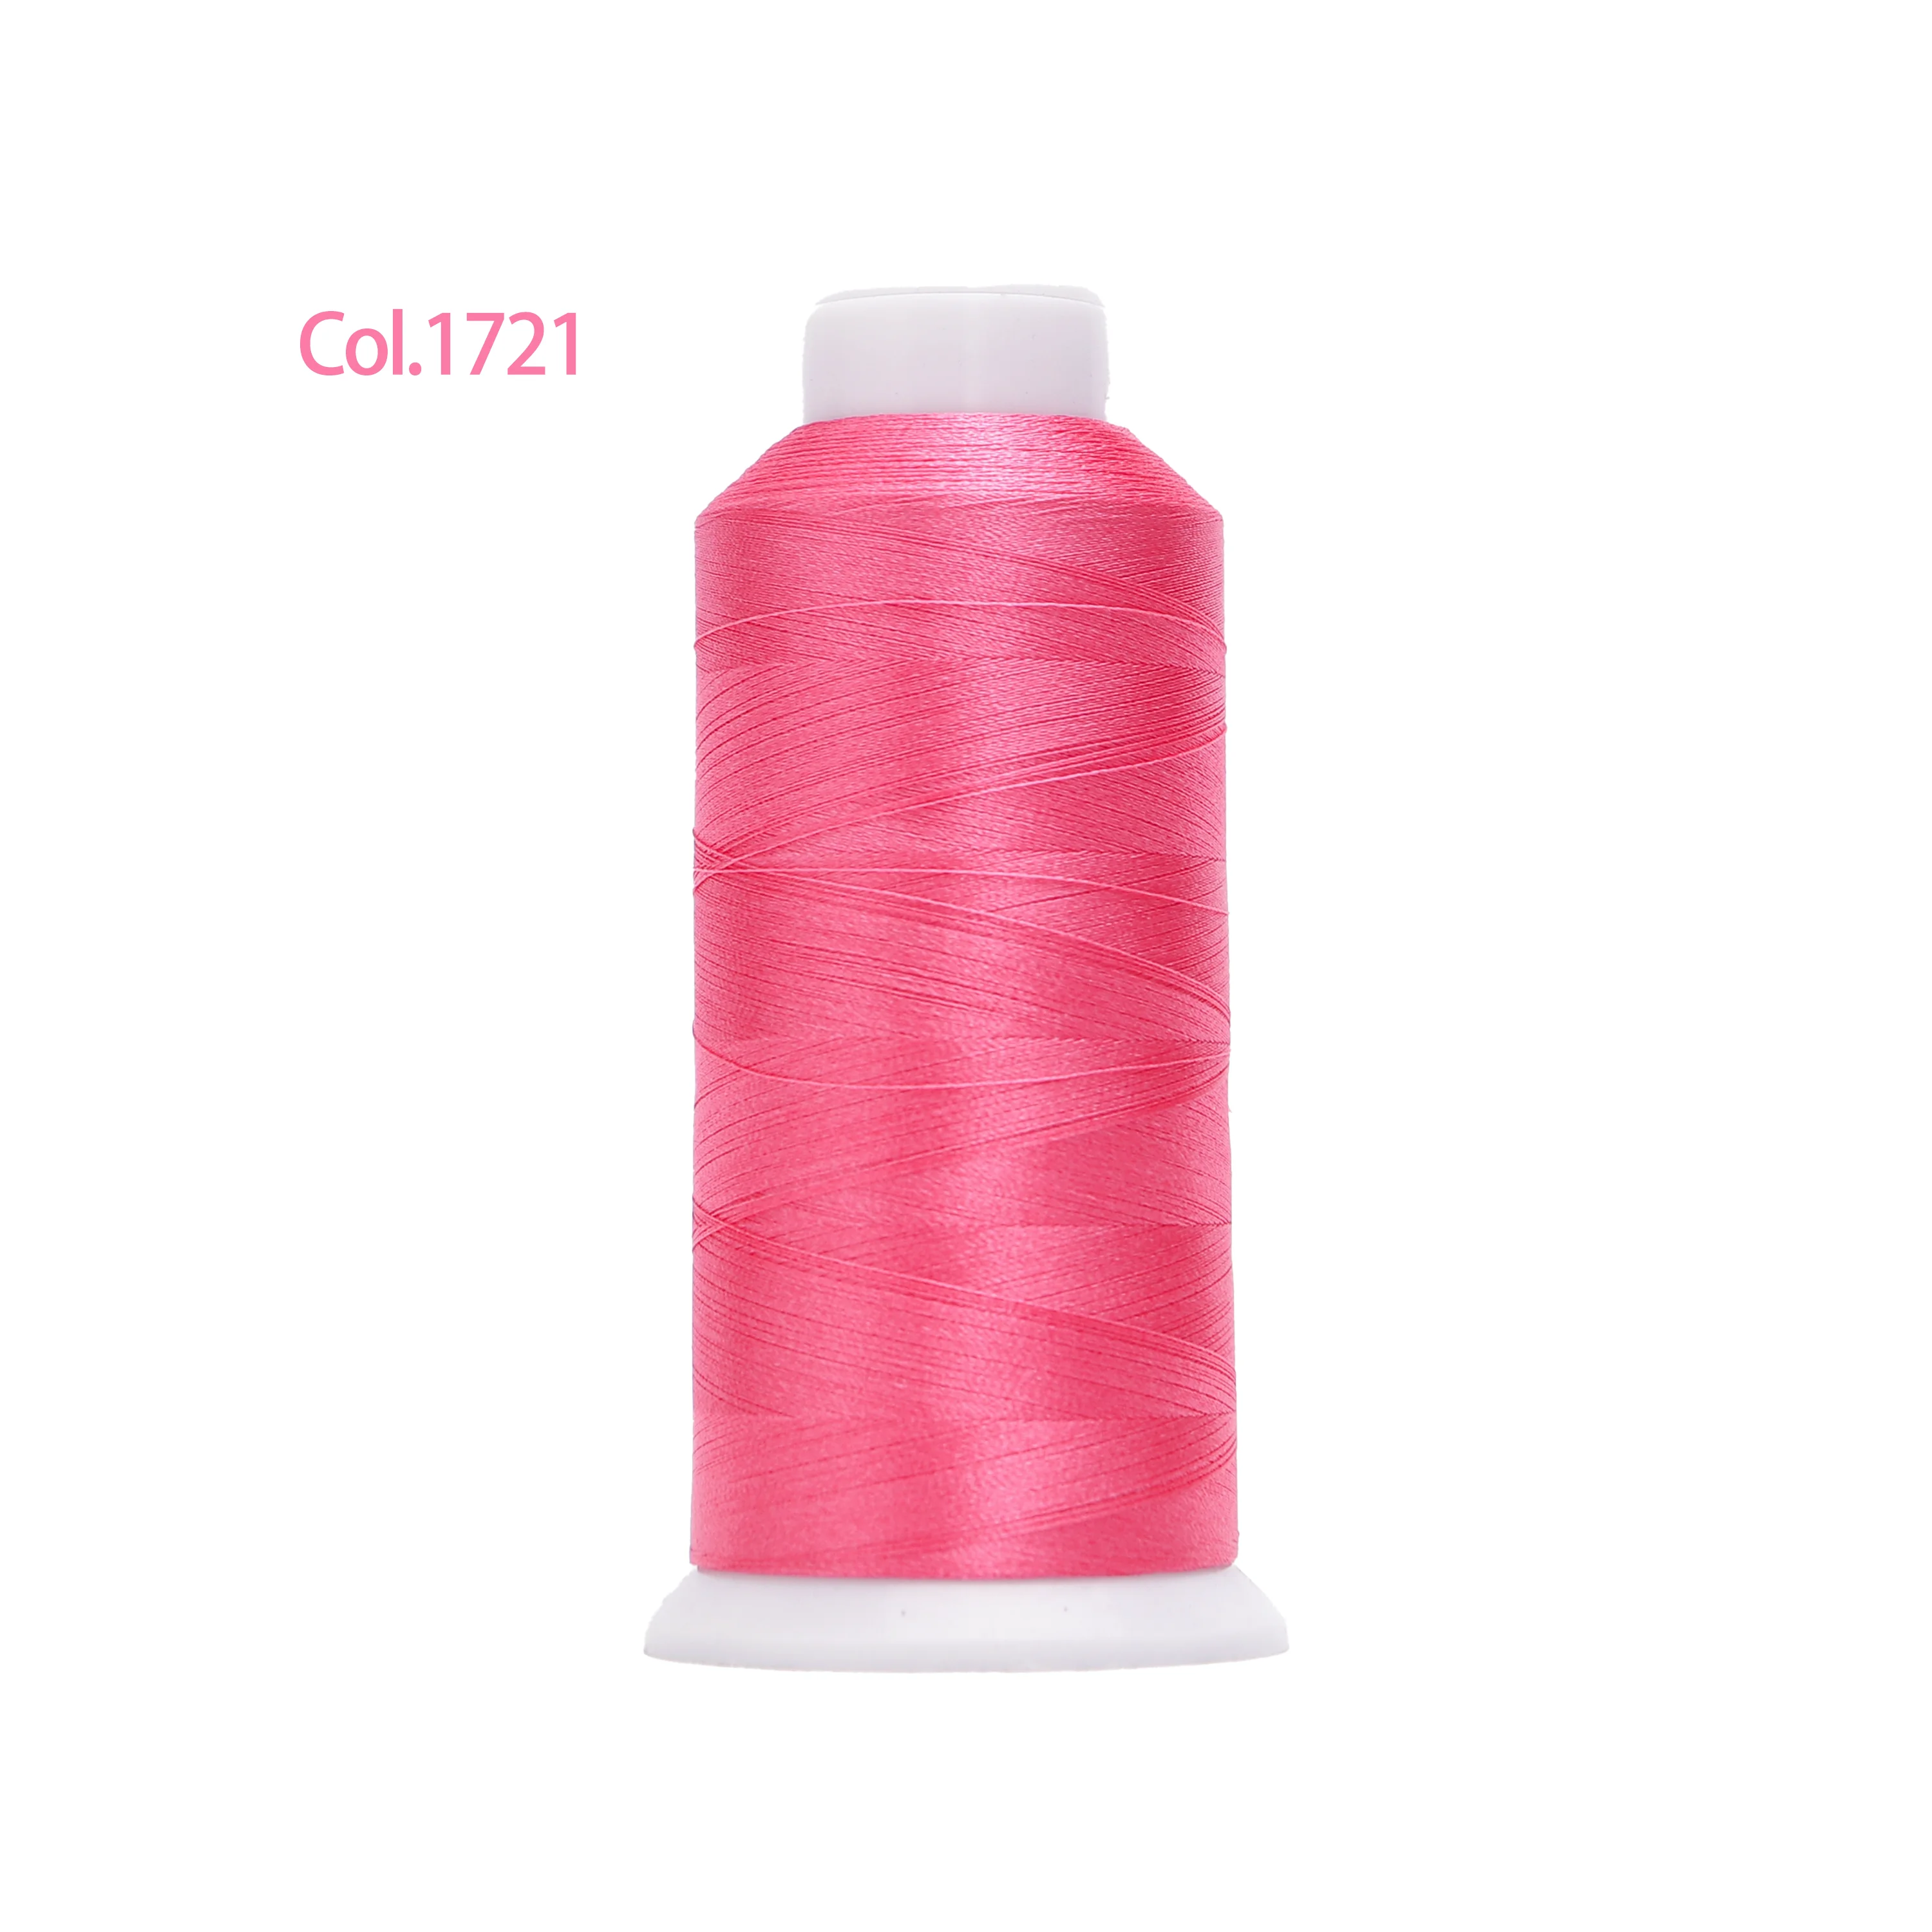 40 Weight 120D/2 Polyester Embroidery Thread 4000 Meter Brother Singer Household Industrial Machine 80 Ｍadeira Colors Available